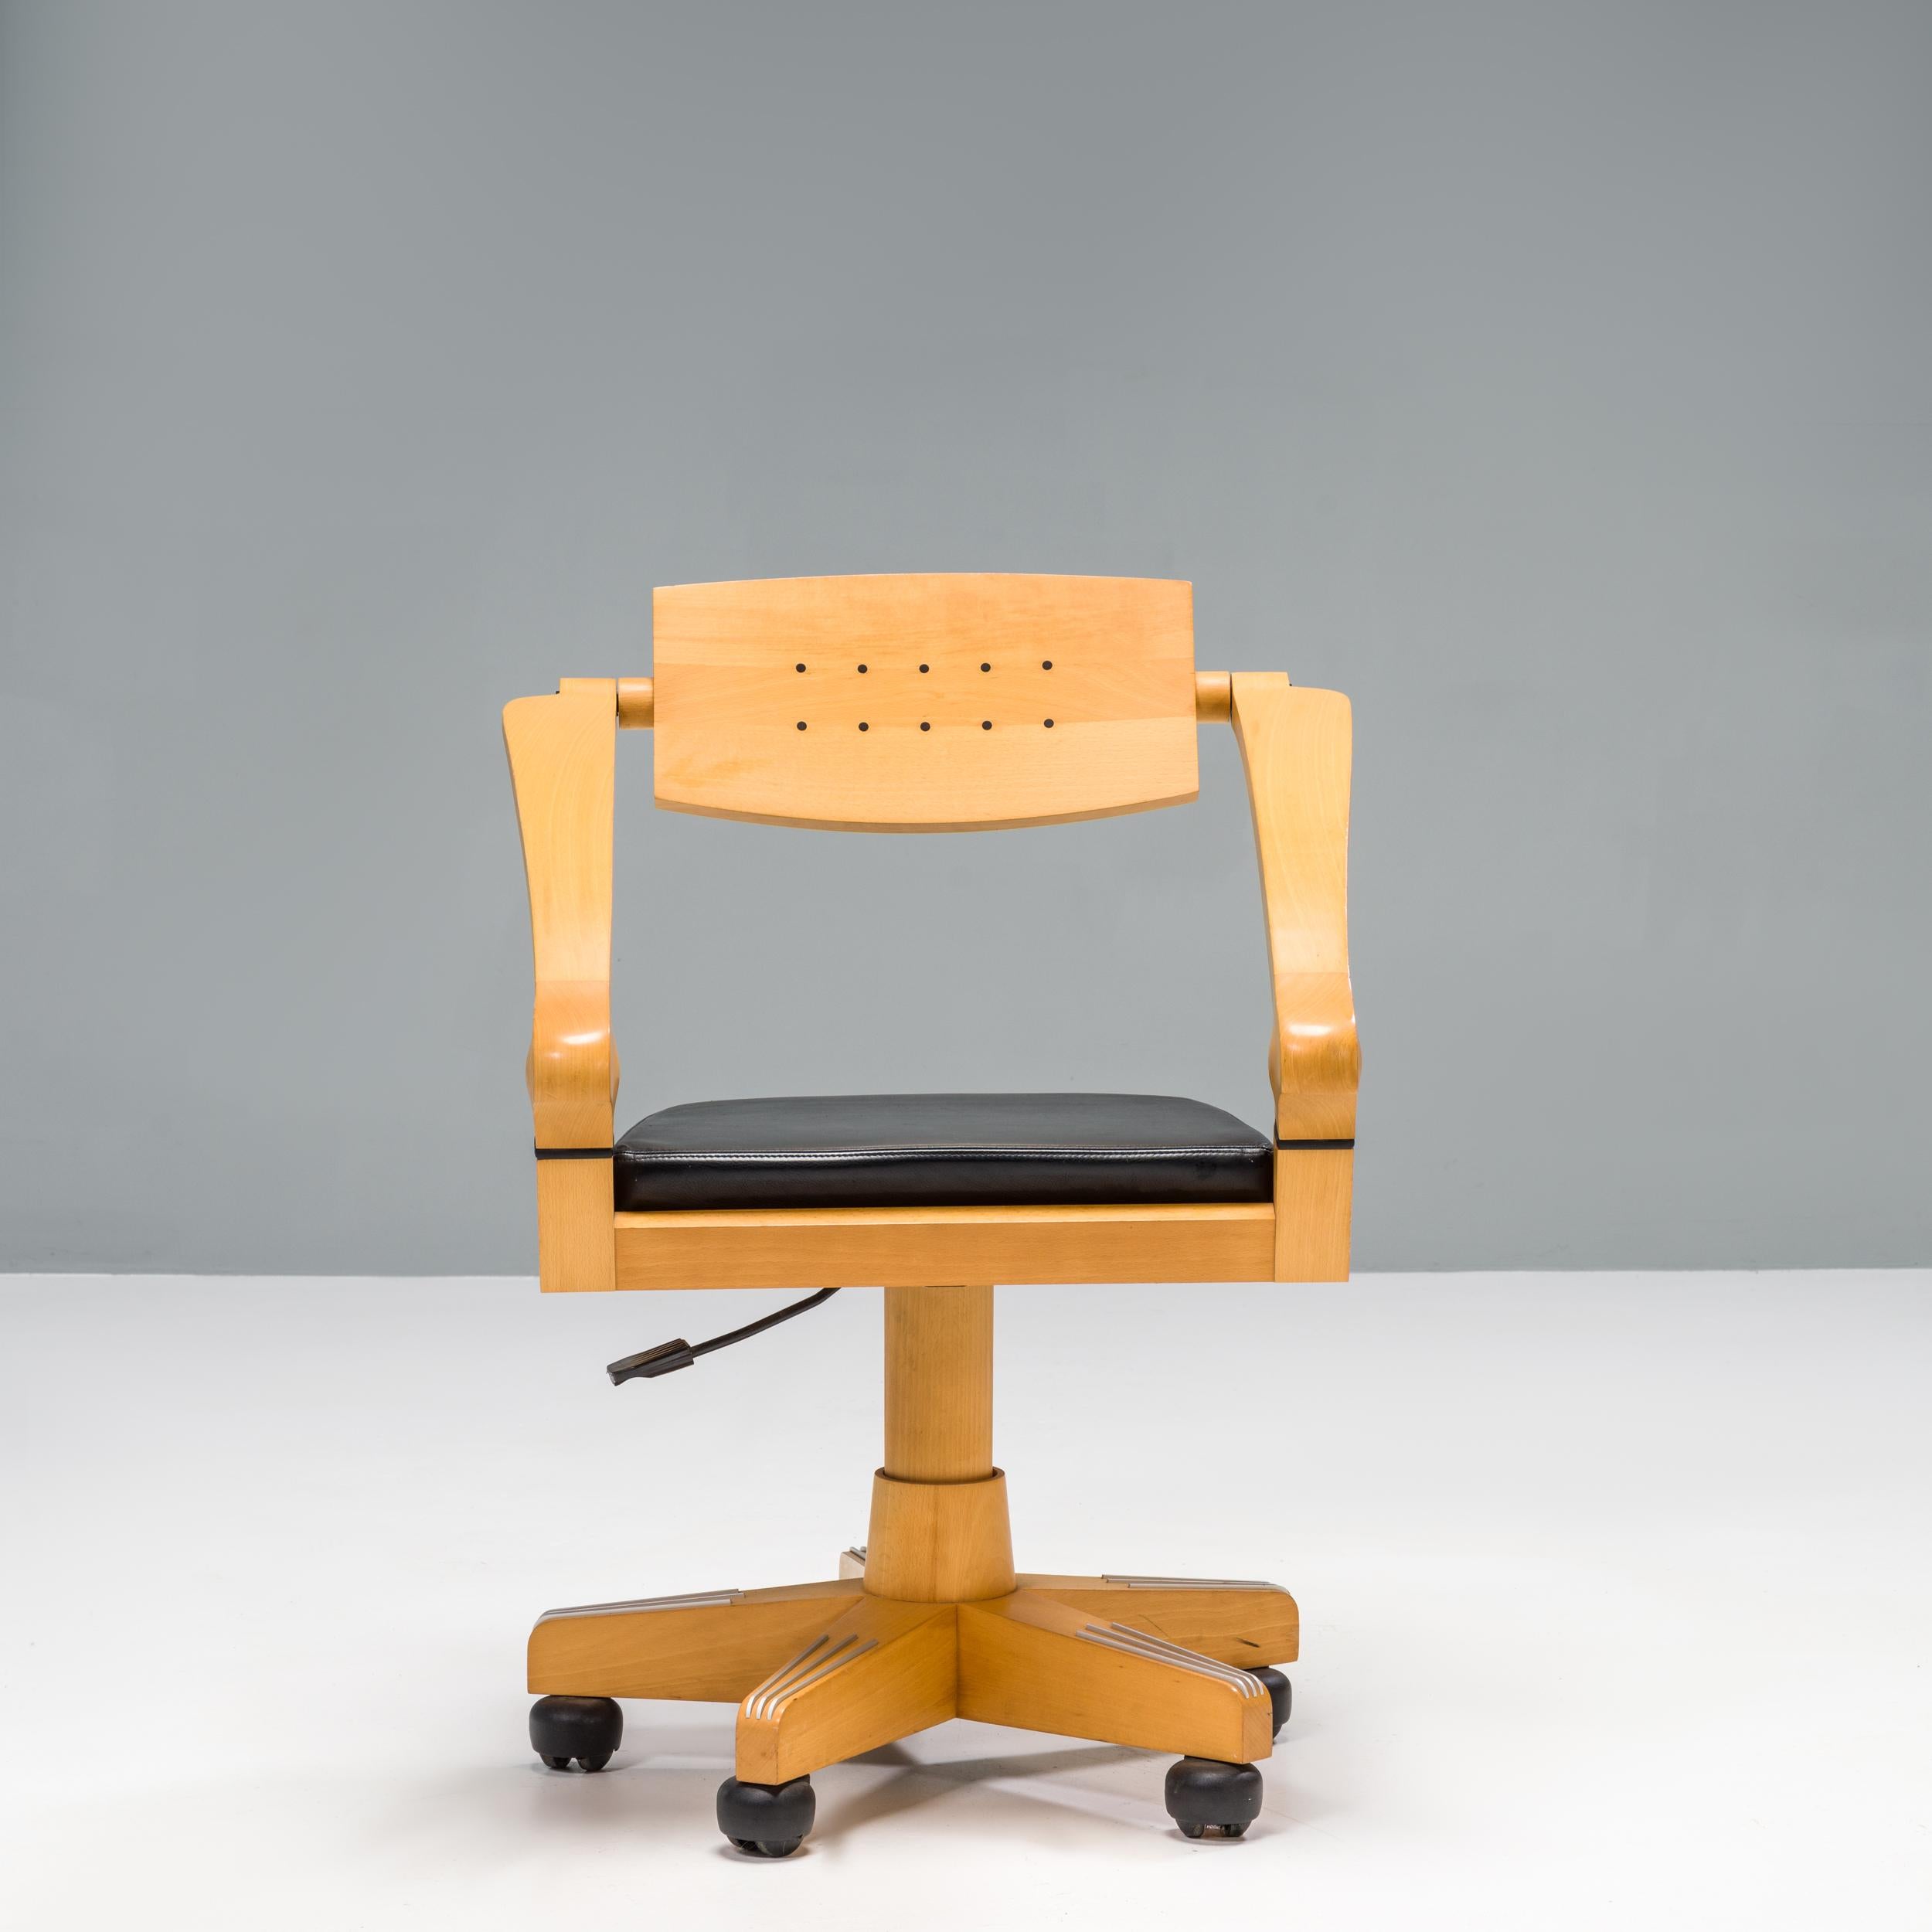 The Spring office chair was designed in 1994 by Massimo Scolari for Giorgetti to match the iconic Zeno desk.

Constructed from polished beechwood, the chair sits on a comfortable spring base with black wheels and anodised aluminium guard